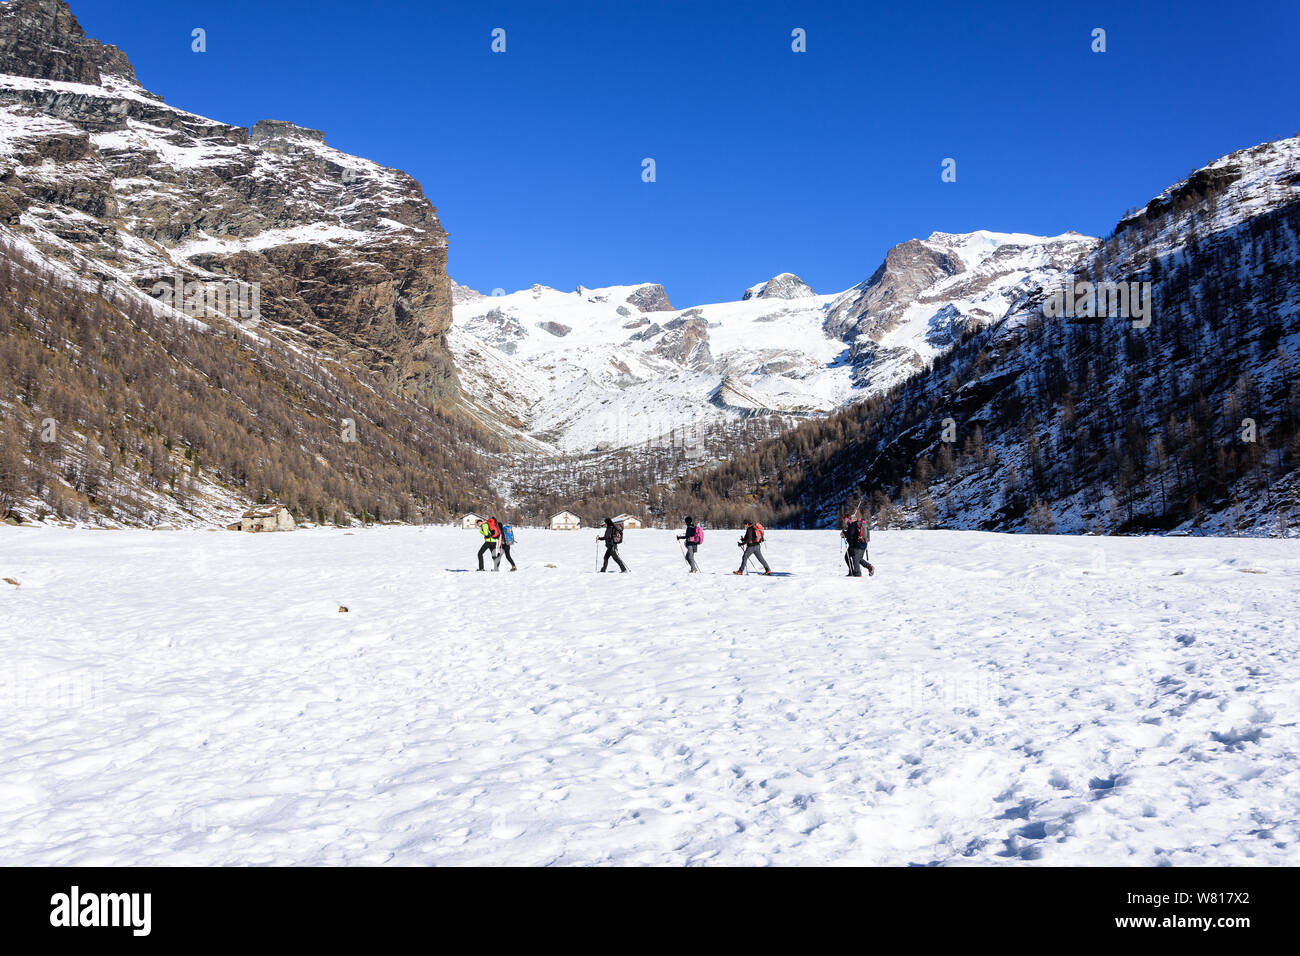 Group of hikers trekking in the mountains of the Alps. The trekkers are going through a snowy landscape. Italy Stock Photo